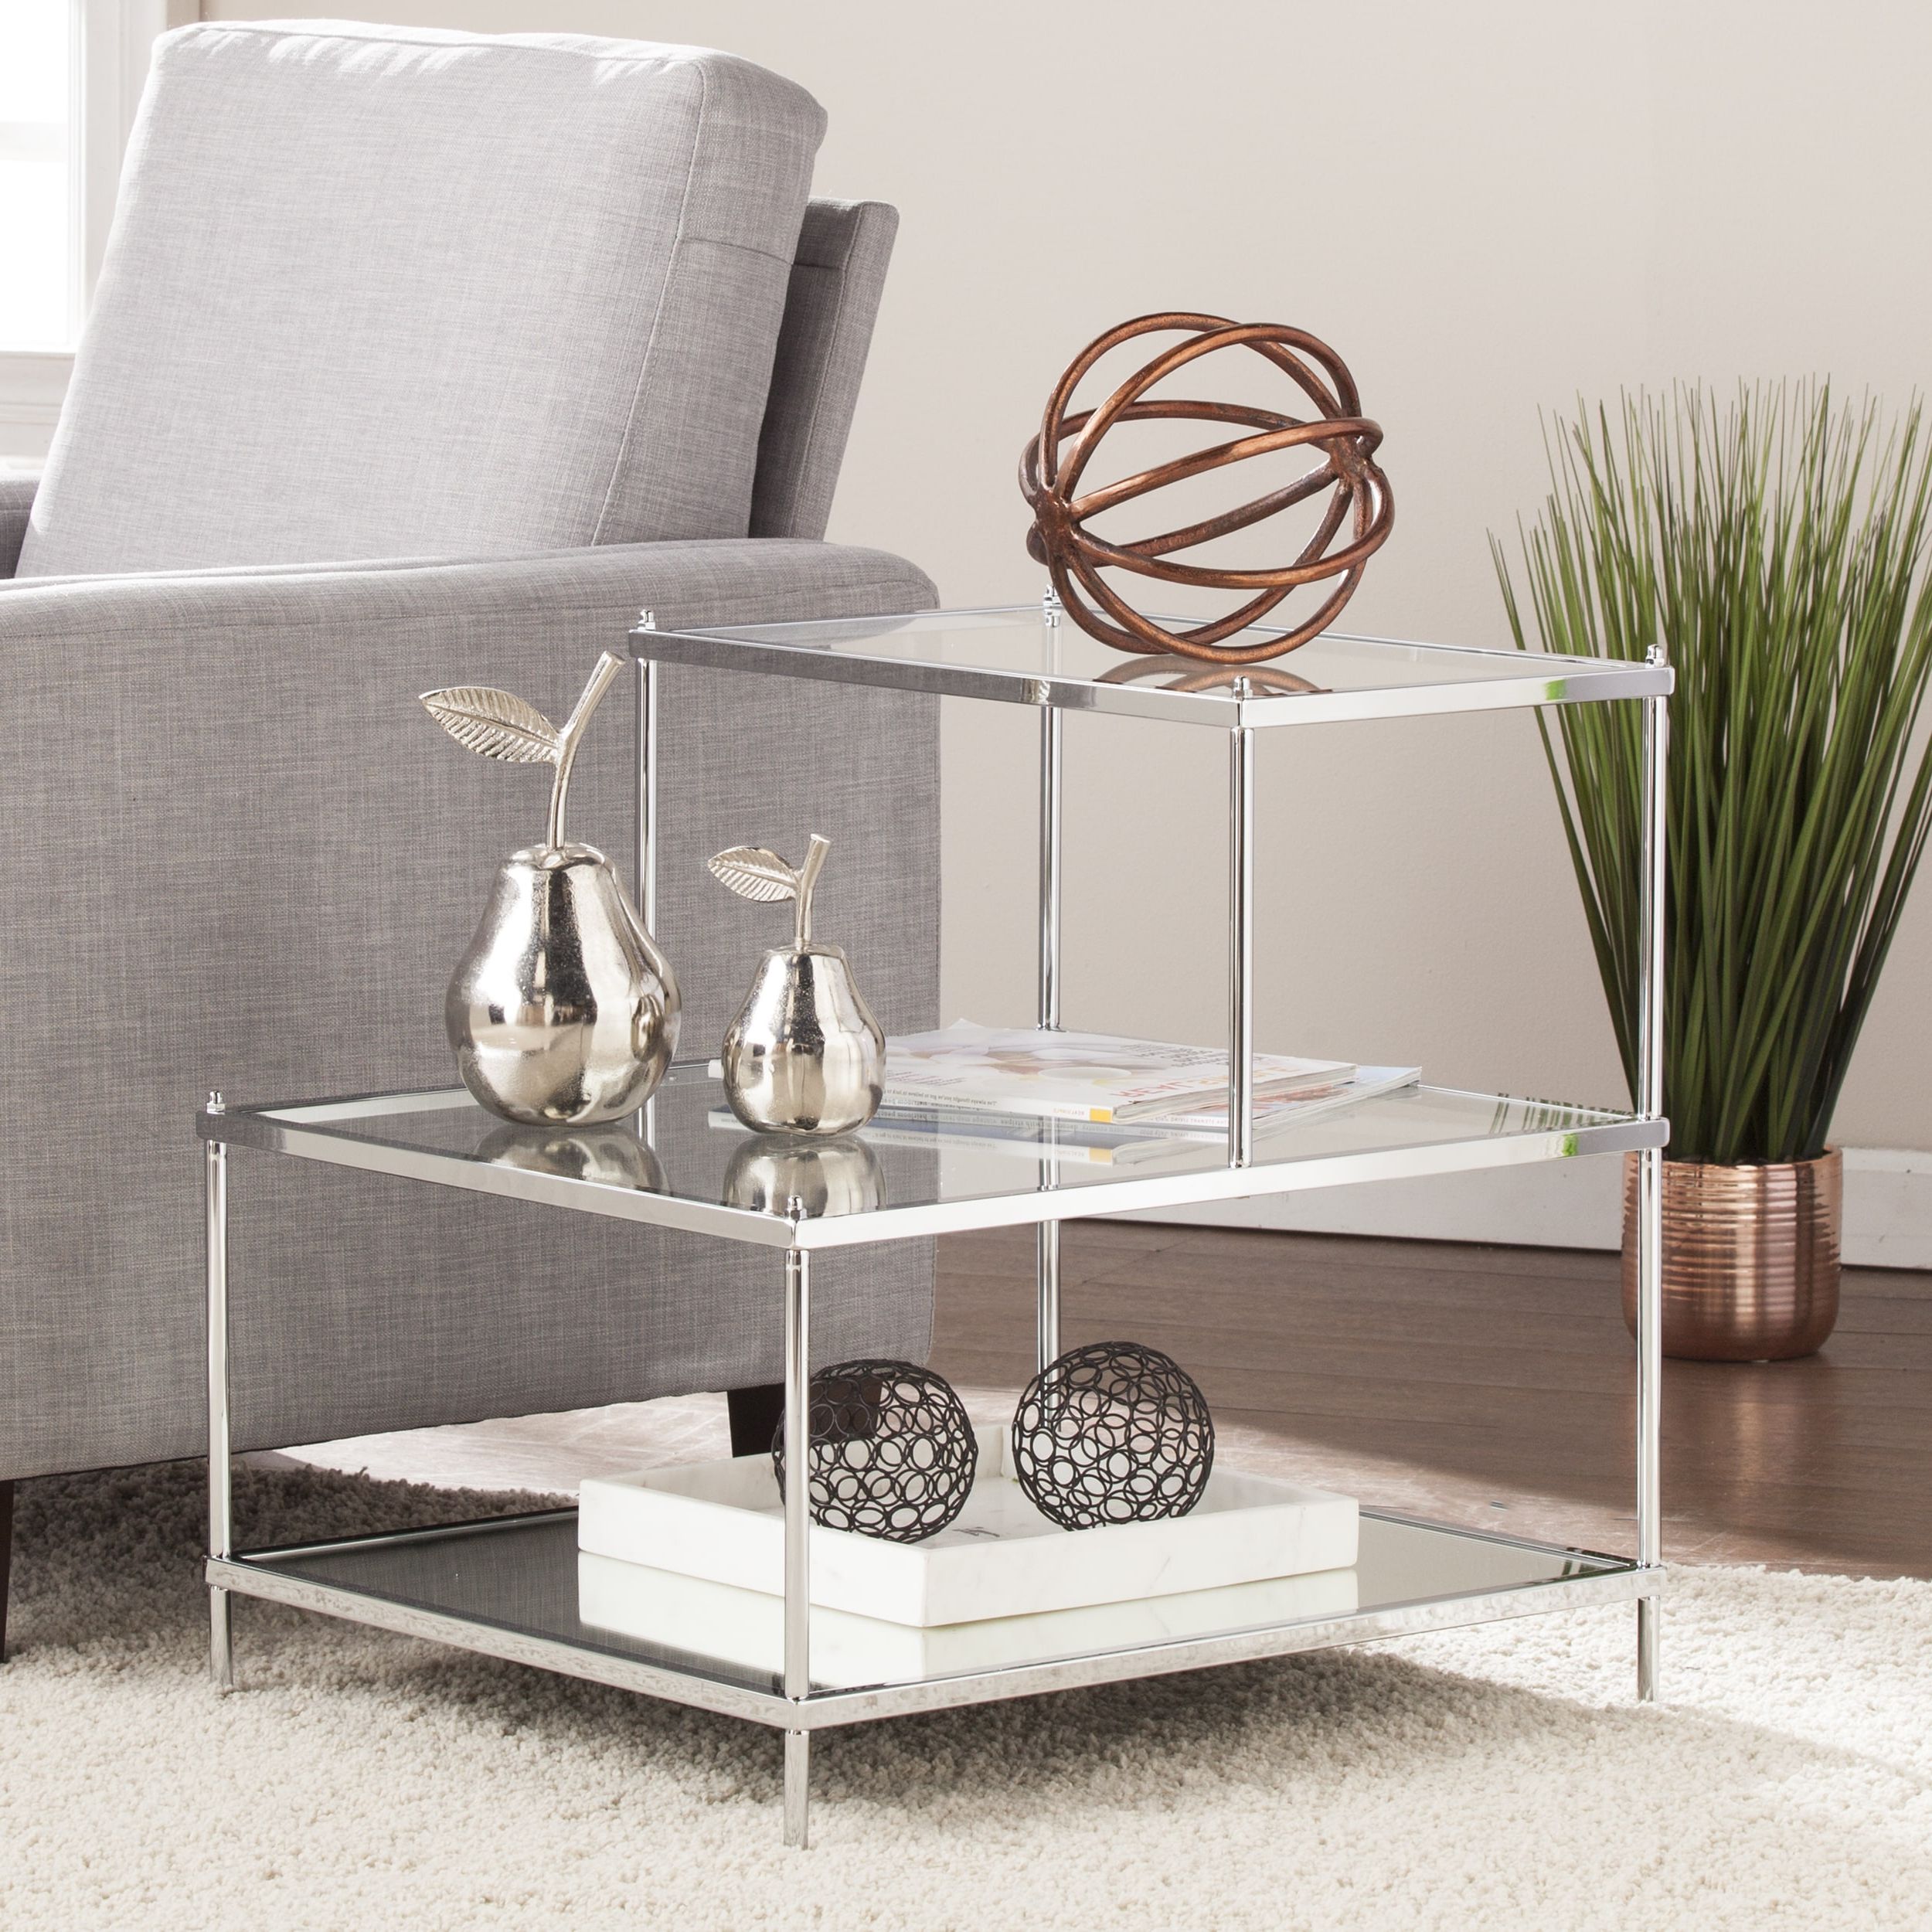 Silver Orchid Olivia Glam Mirrored Accent Table Chrome Throughout Trendy Silver Orchid Olivia Glam Mirrored Round Cocktail Tables (View 11 of 20)